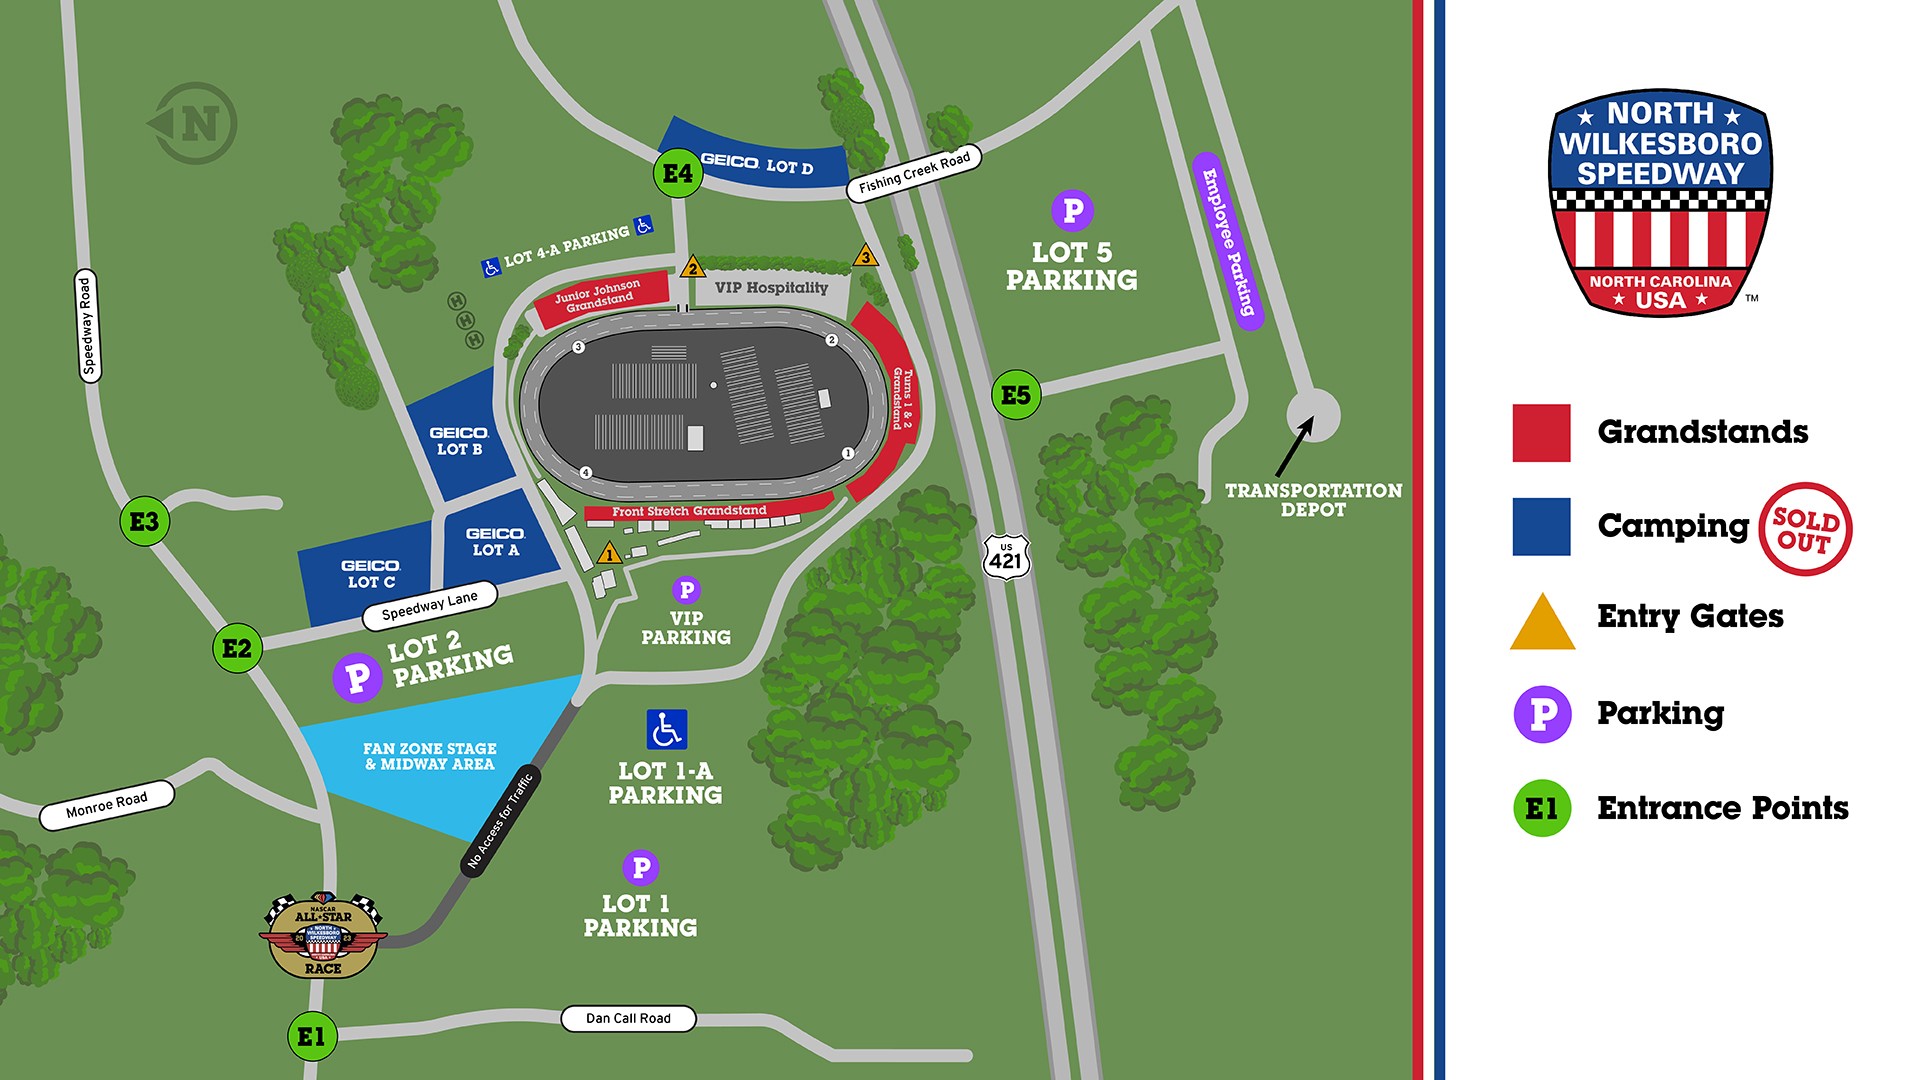 Everything you need to know for NASCAR AllStar week at North